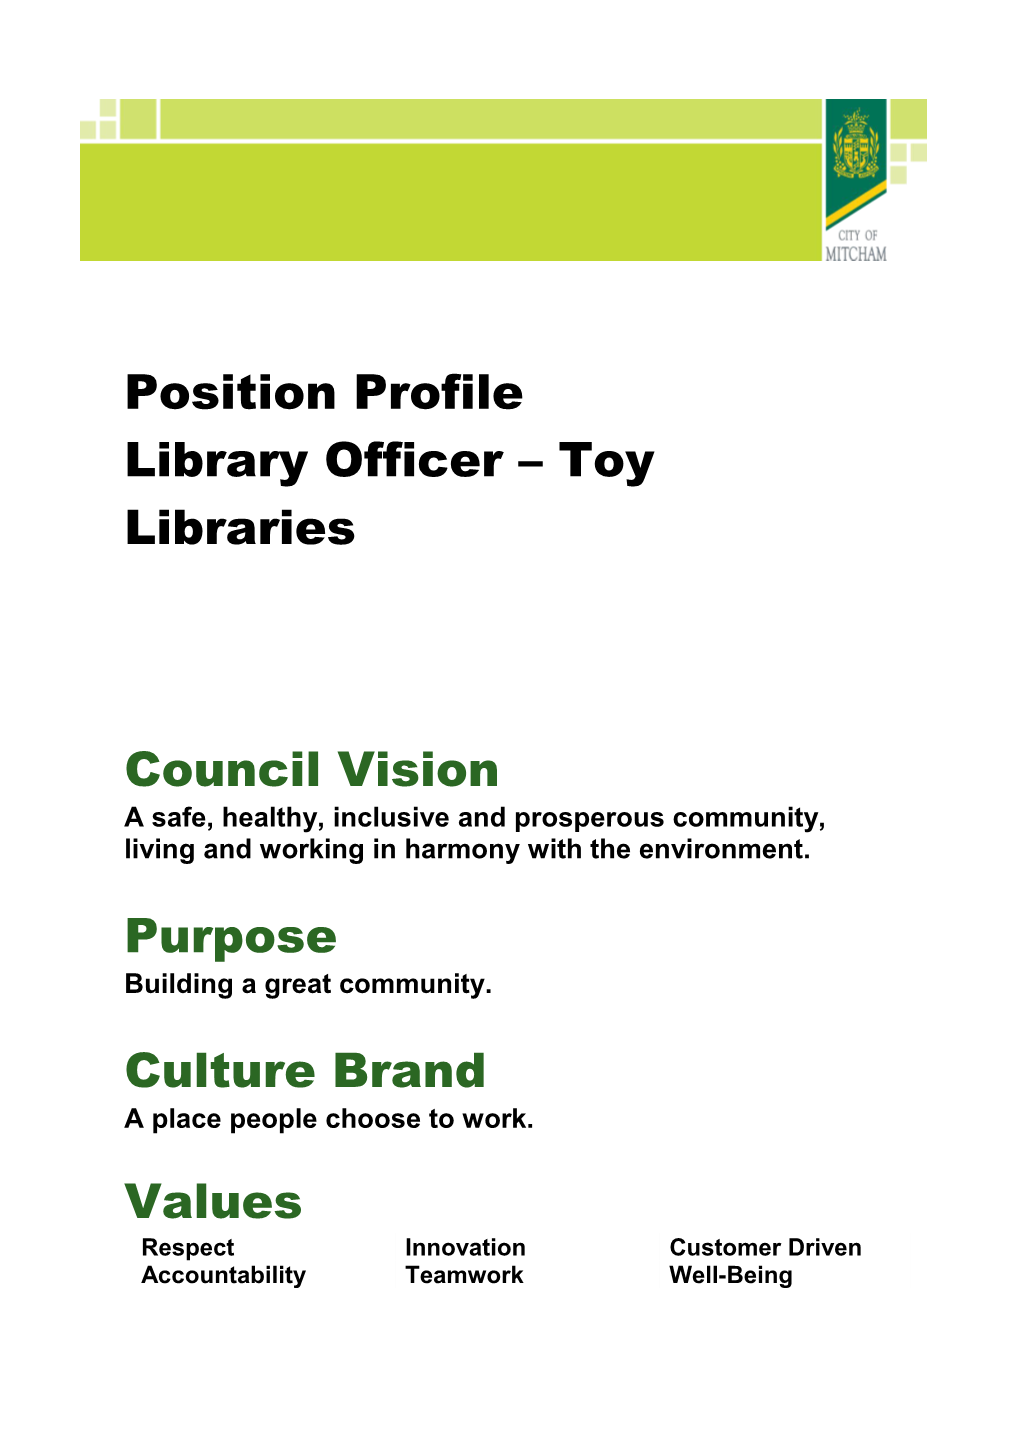 Library Officer Toy Libraries